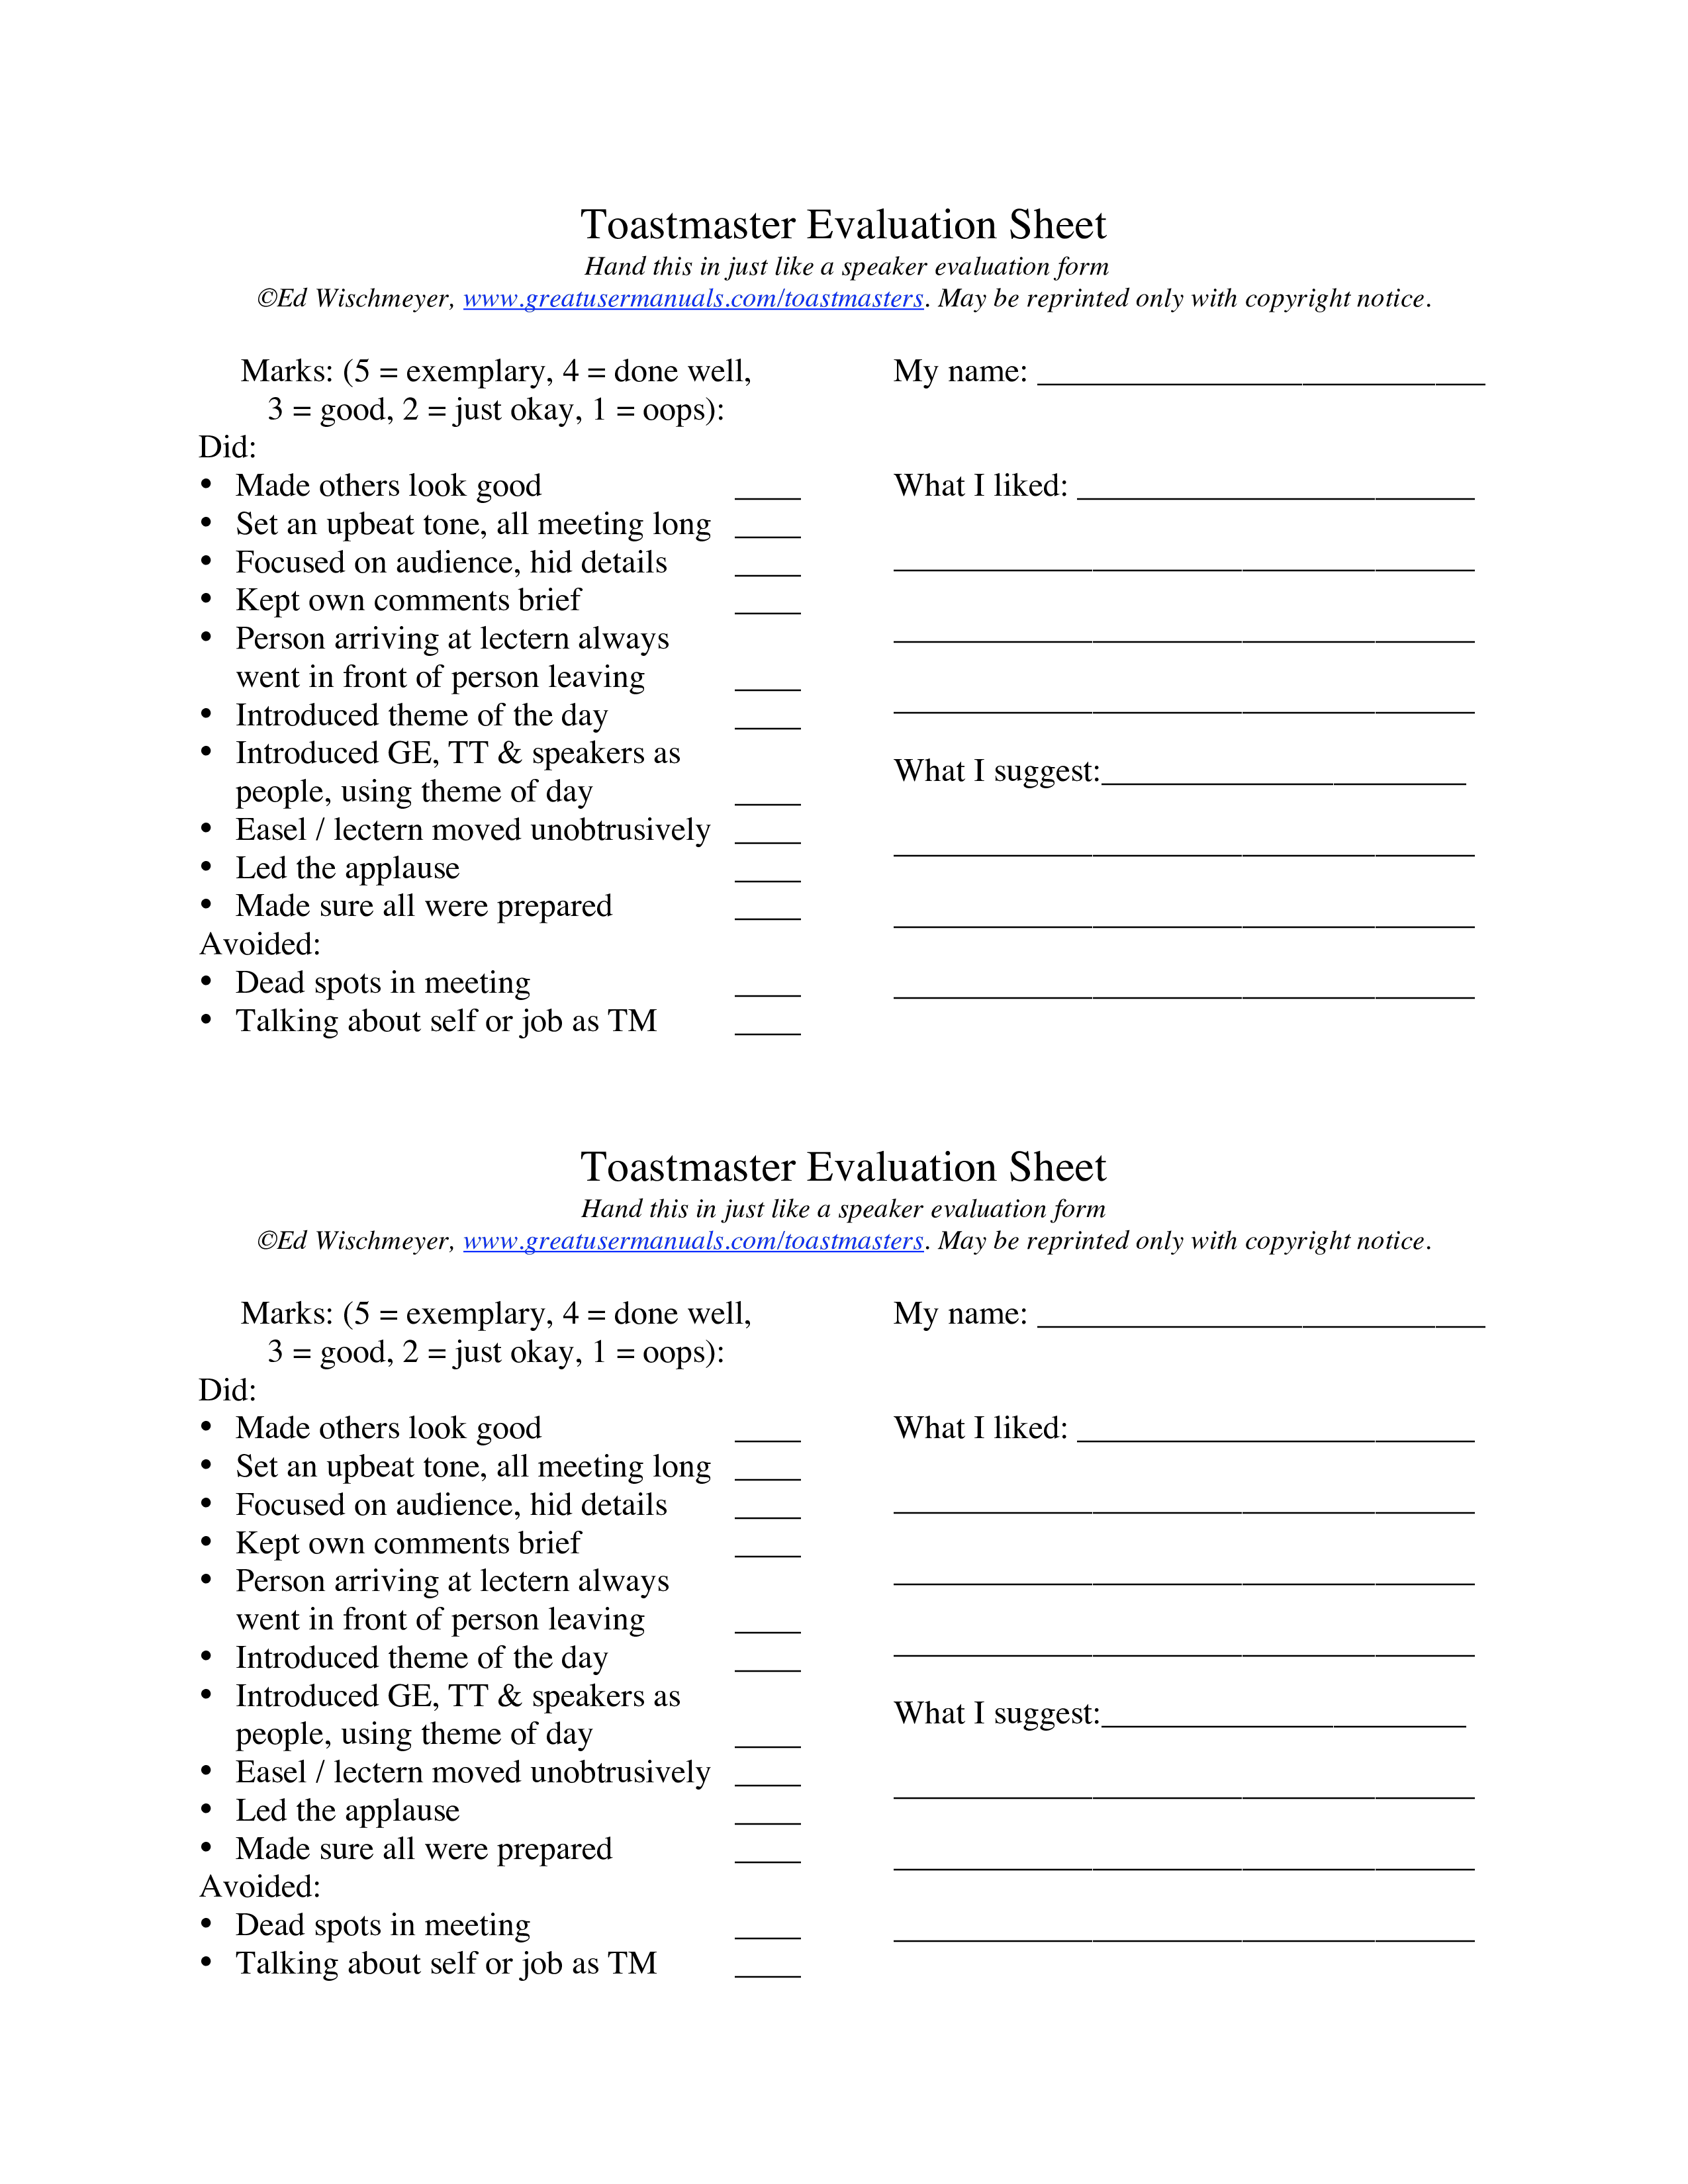 toastmaster evaluation template